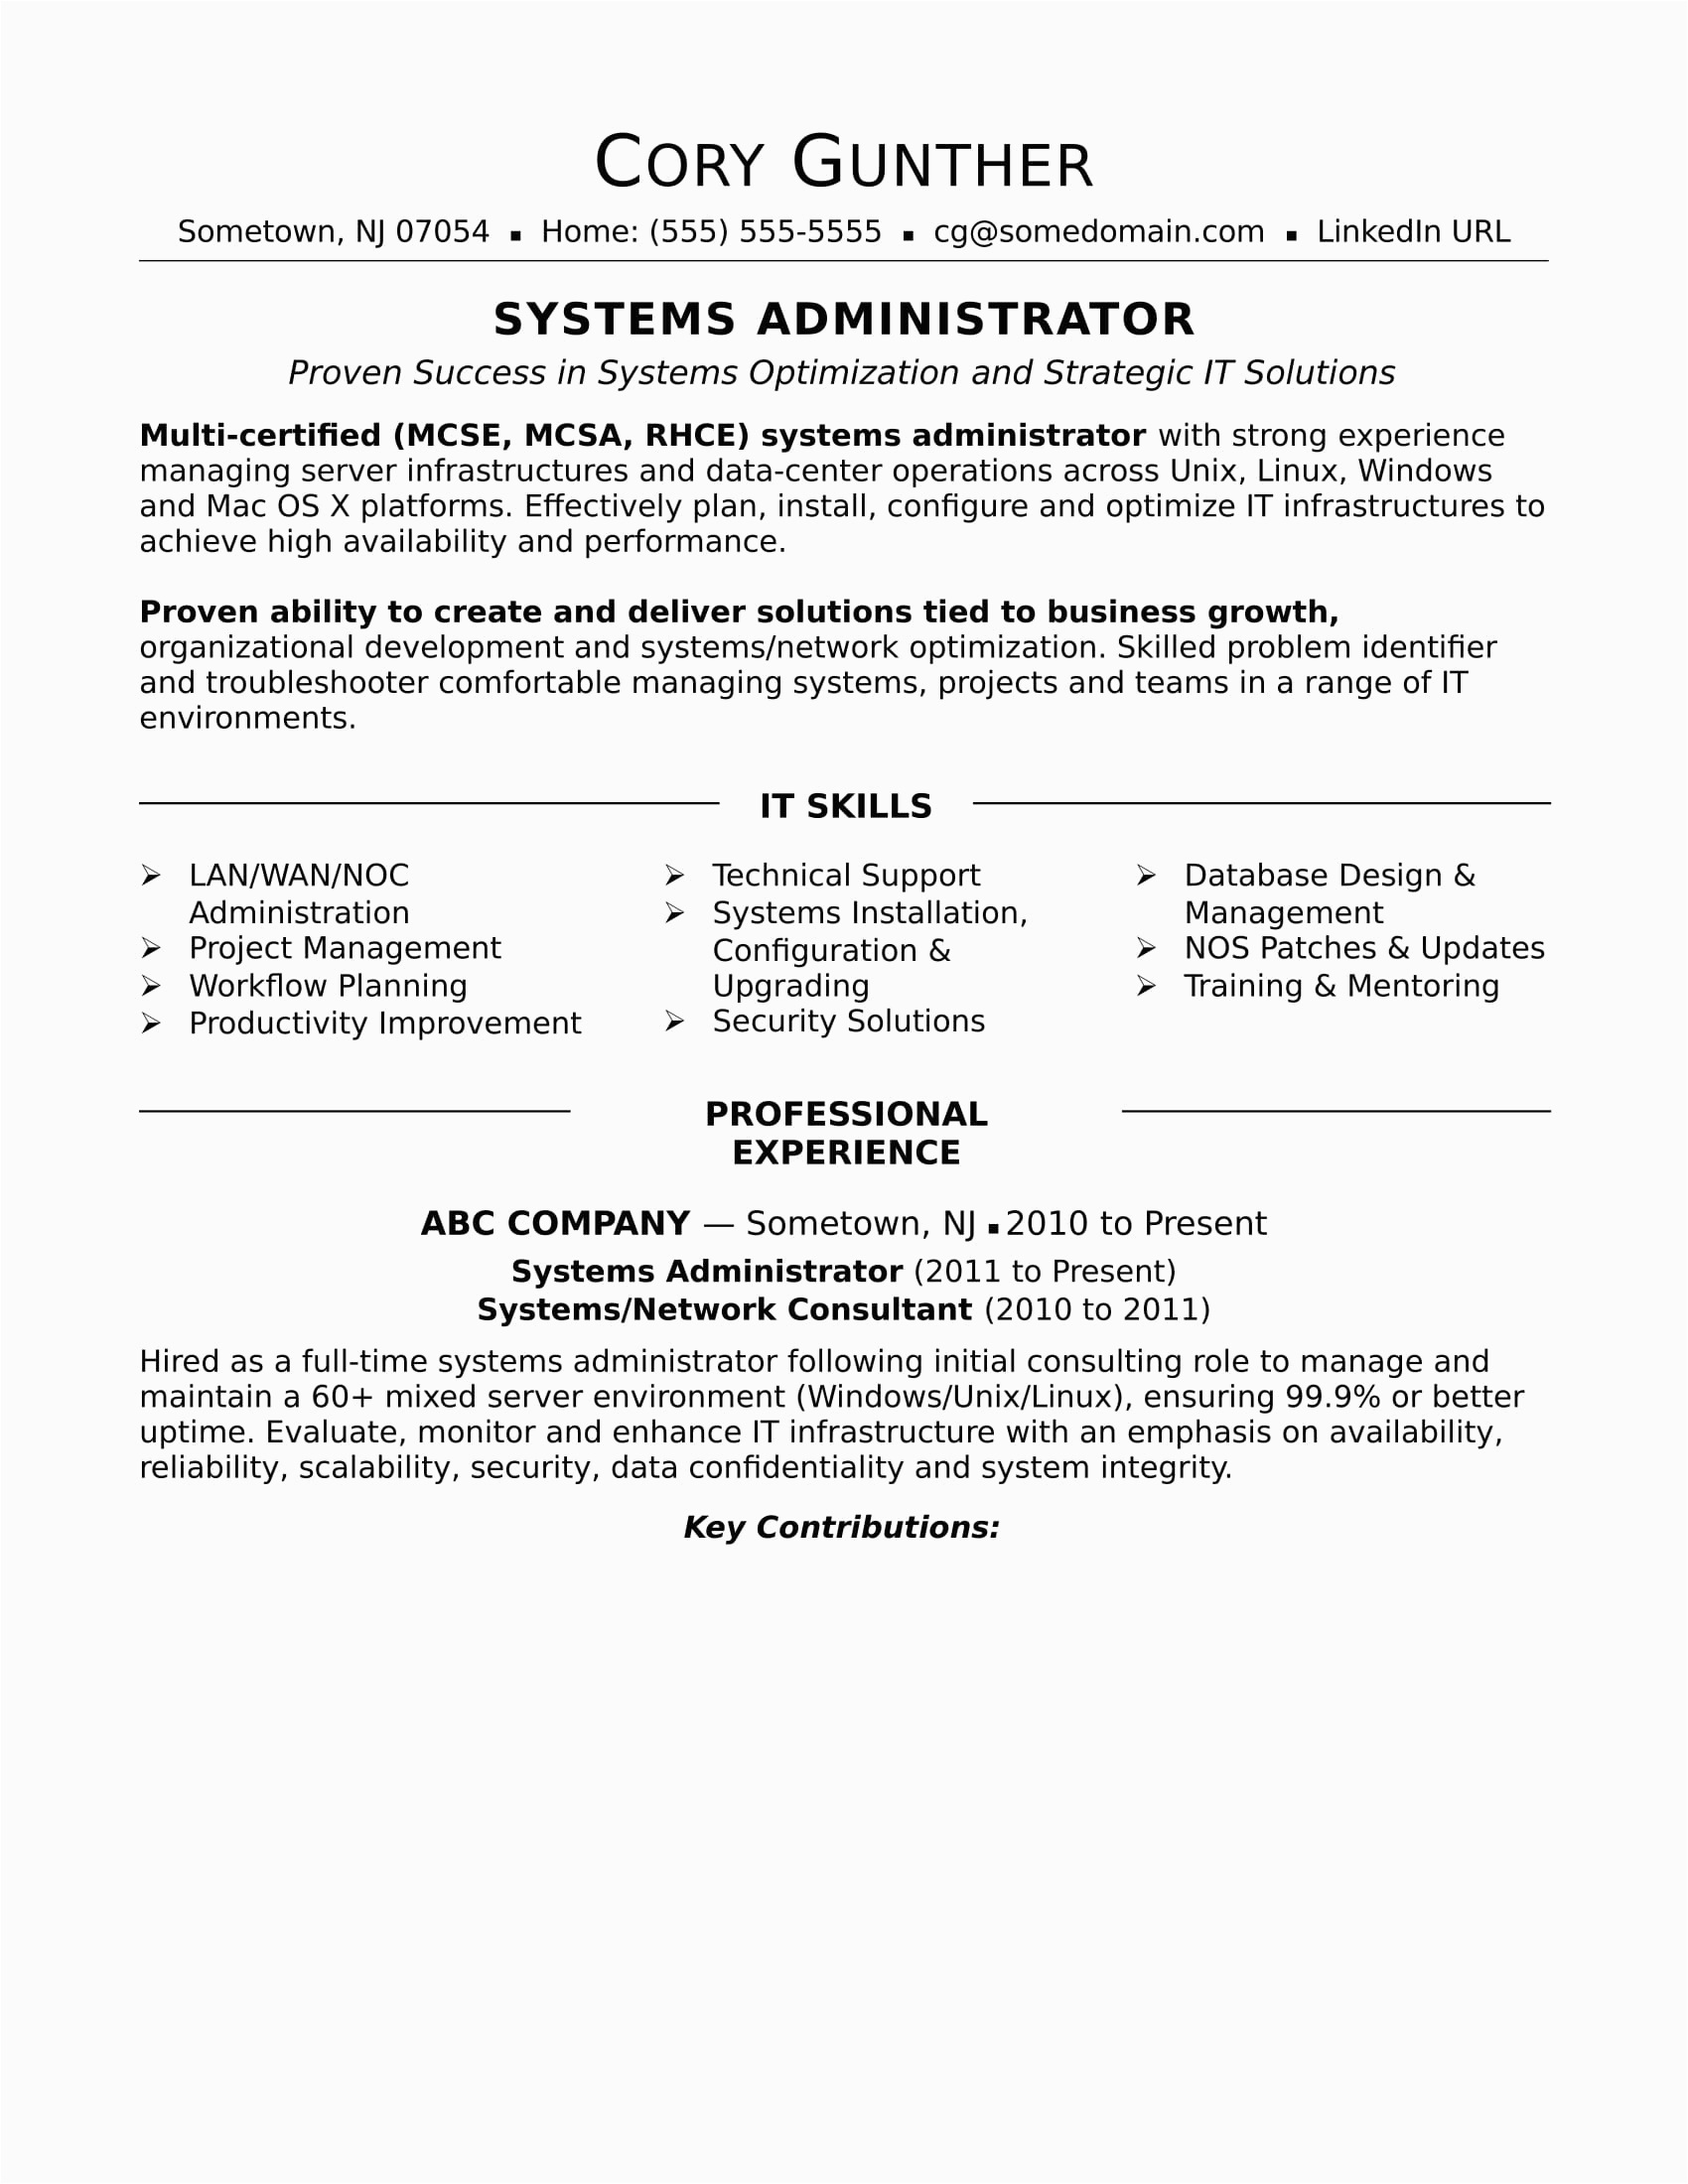 System Administrator Sample Resume 4 Years Experience Sample Resume for An Experienced Systems Administrator